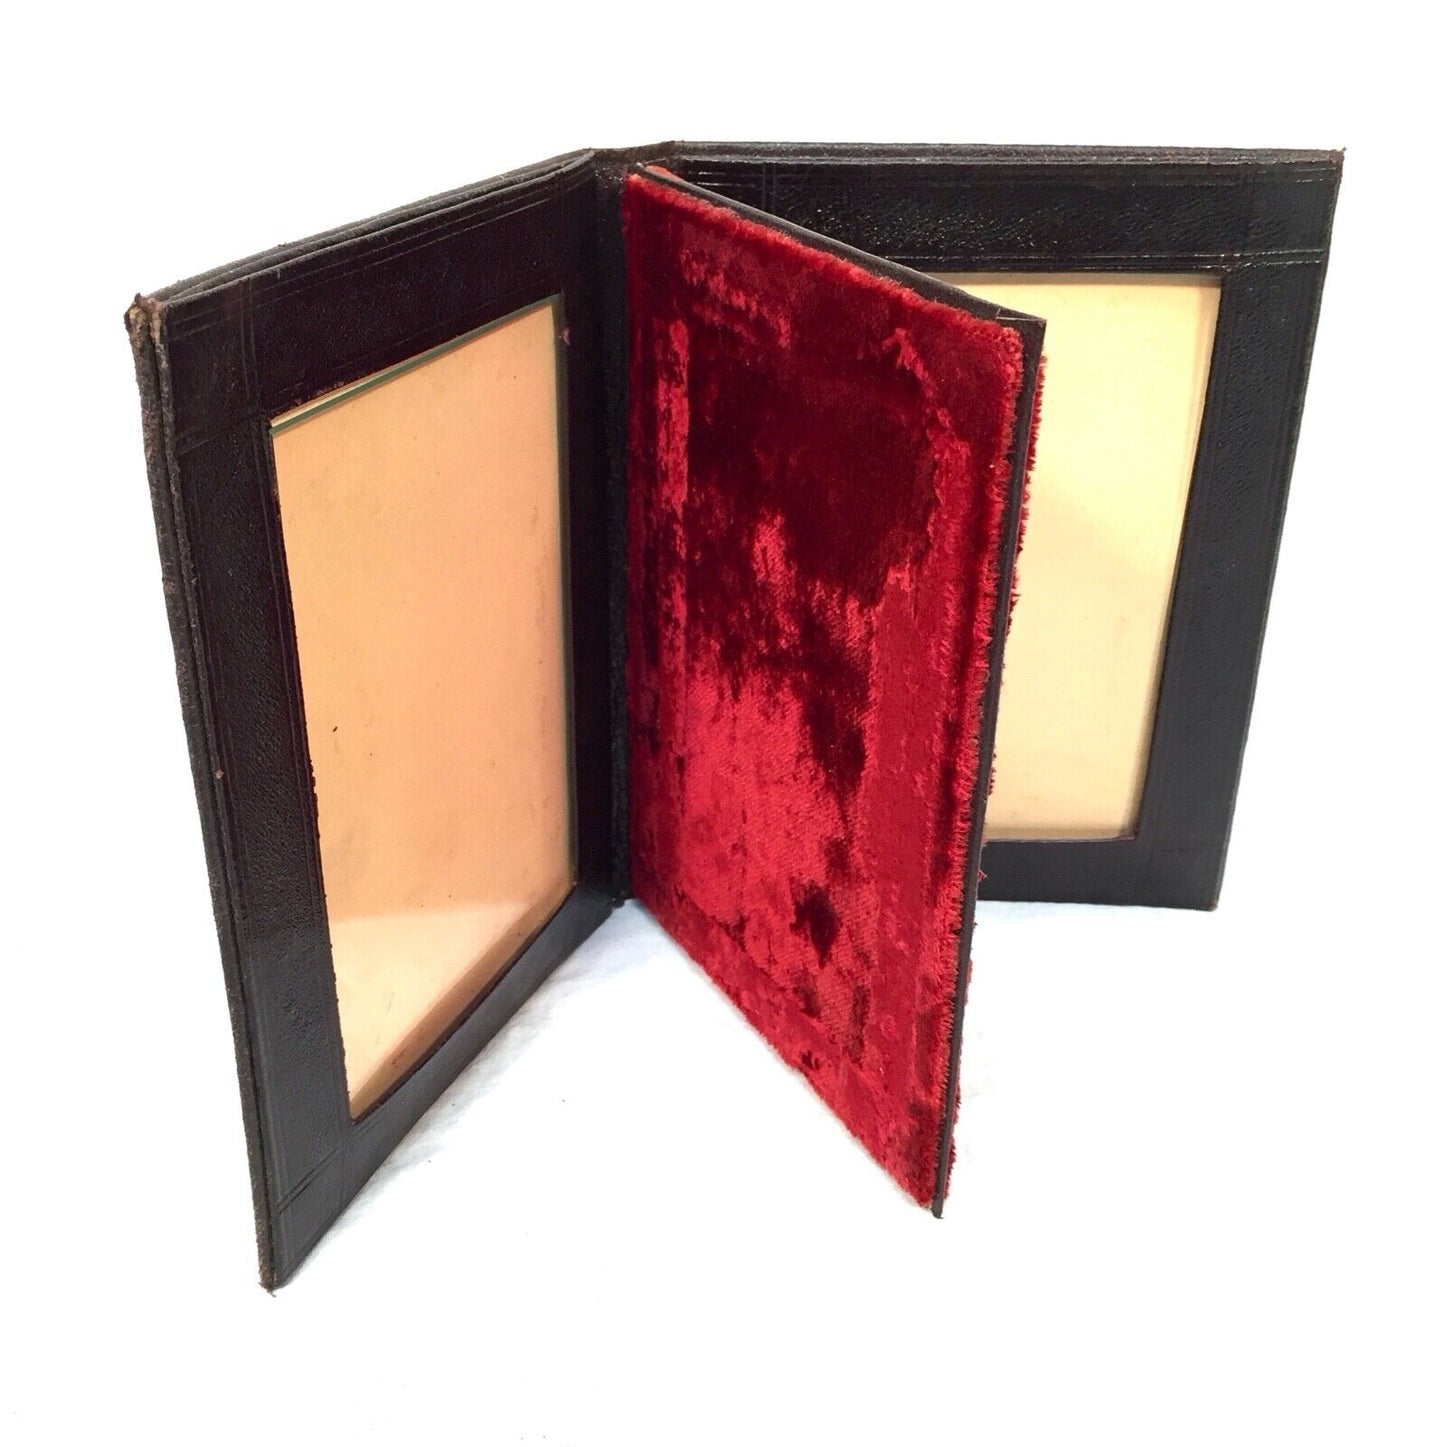 Antique Leather Bound Double Photo Frame / Fold Away / Free Standing